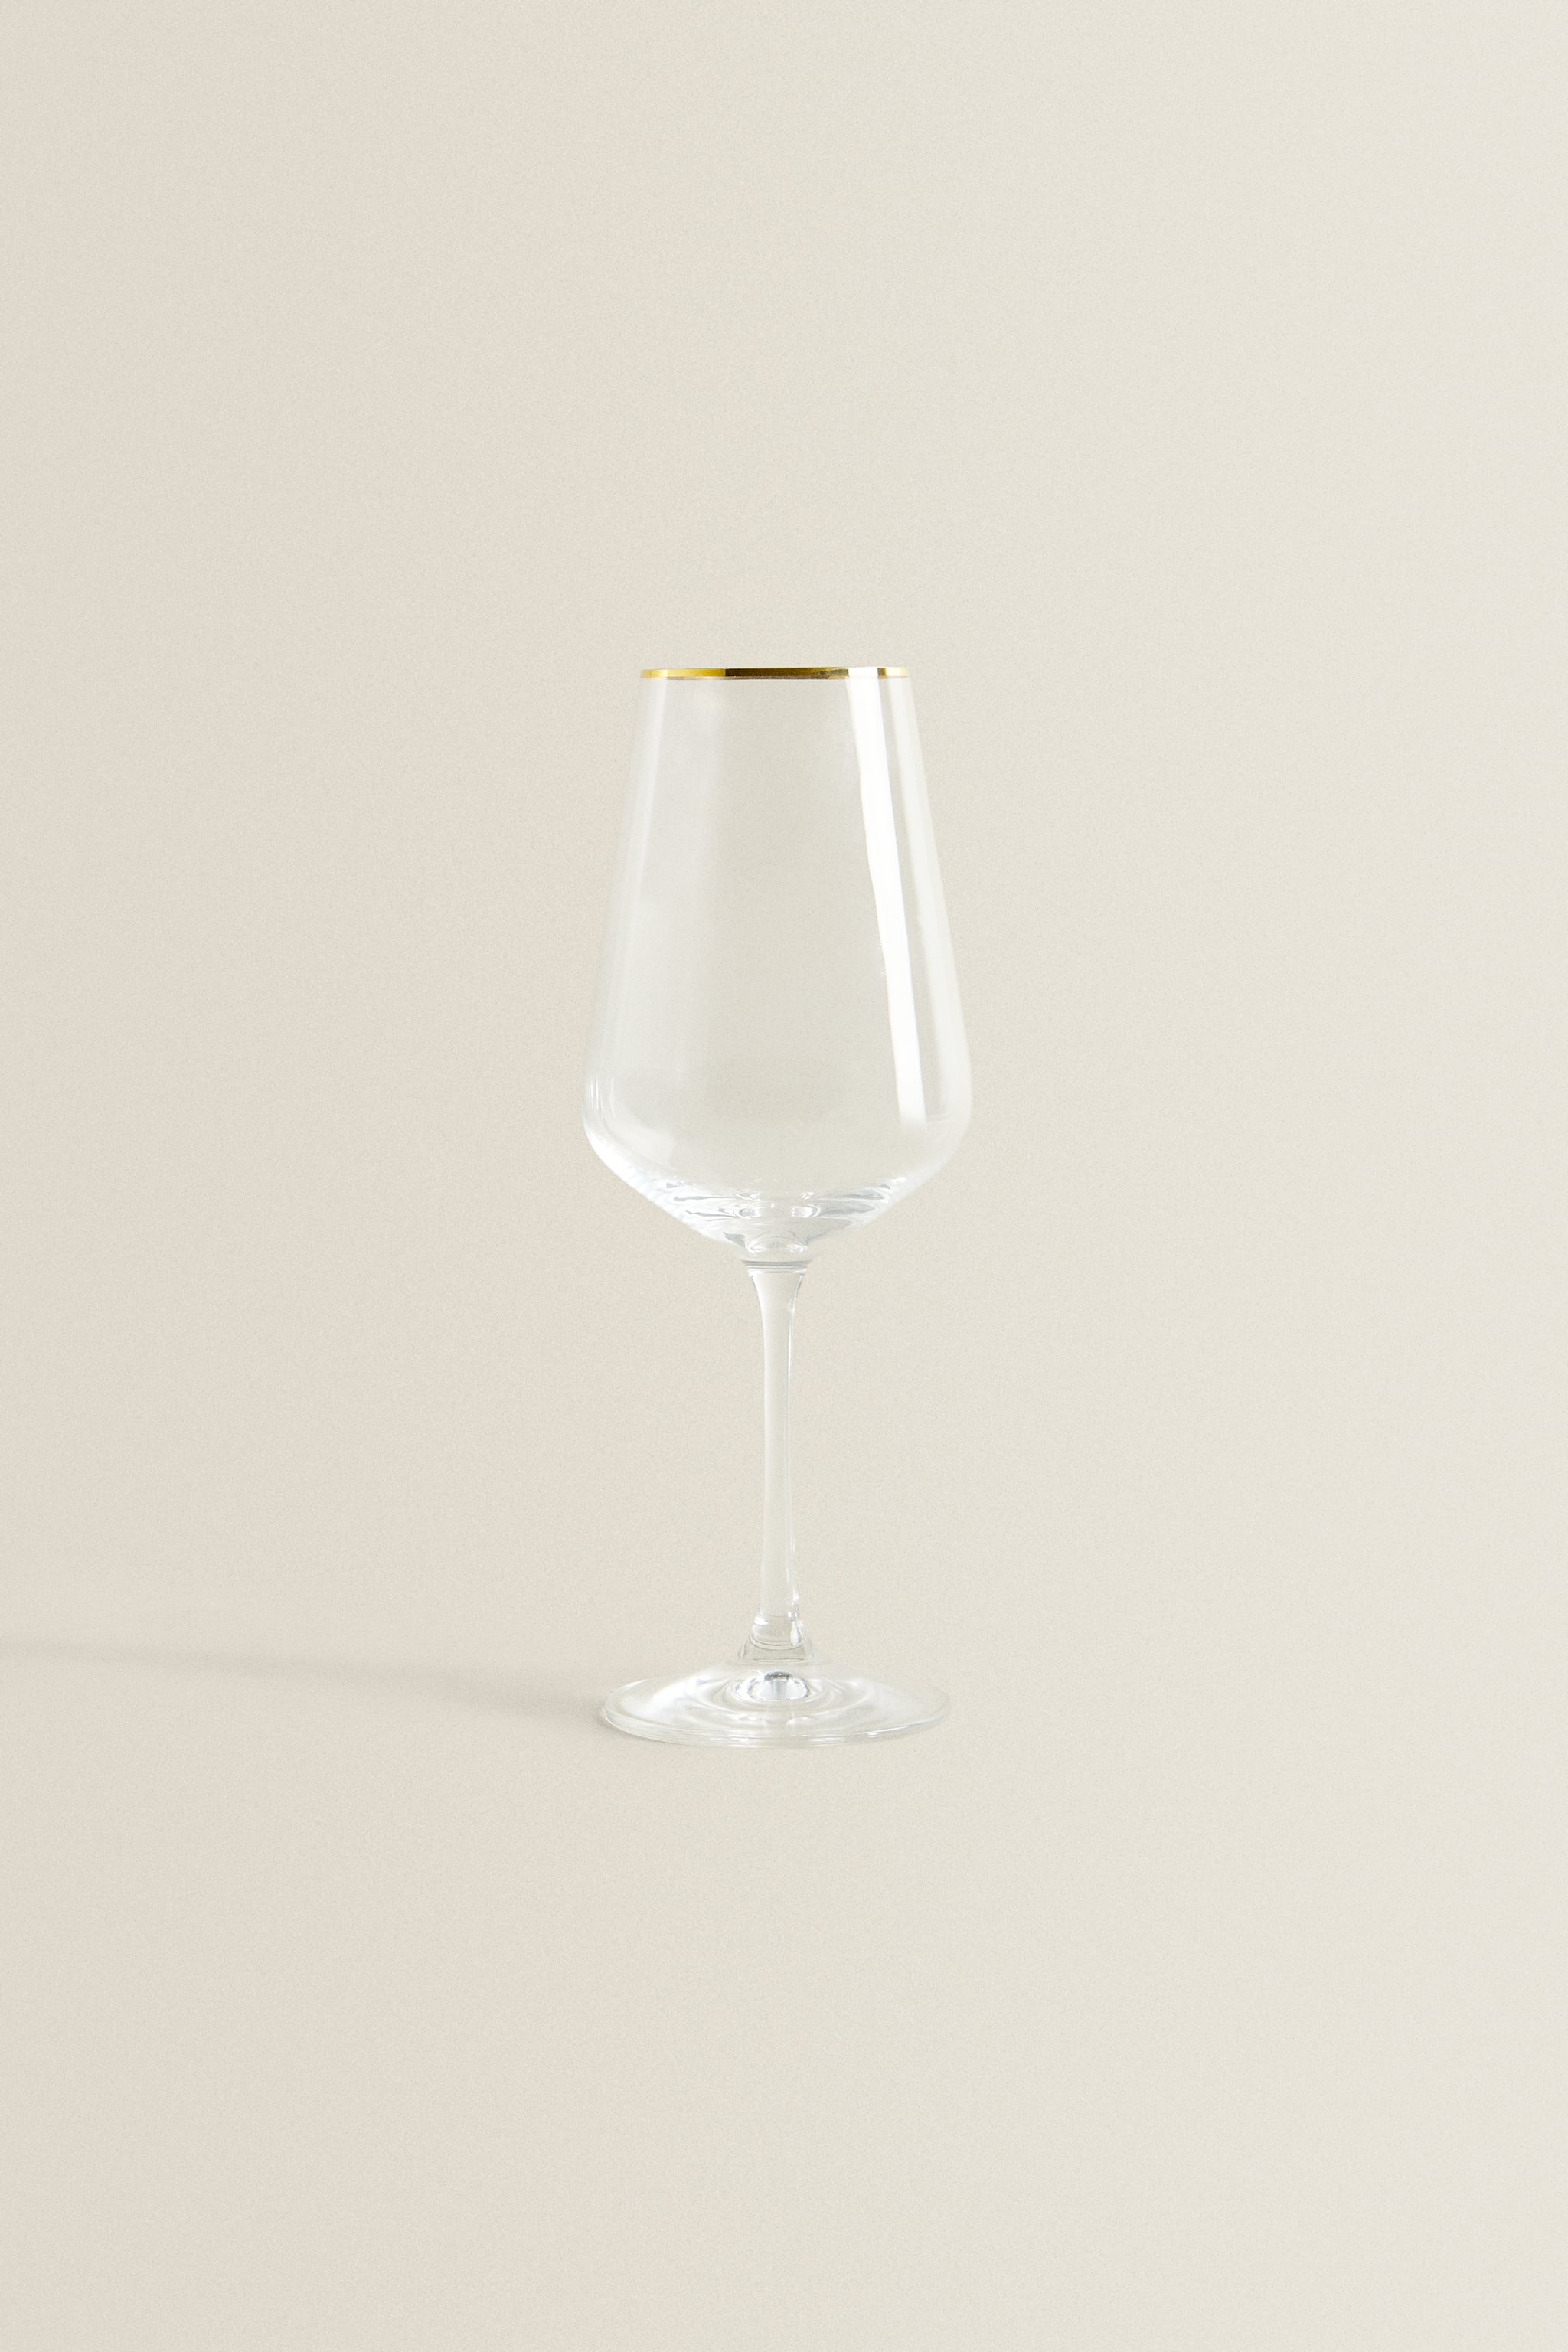 BOHEMIA CRYSTAL GOLD-RIMMED WINE GLASS